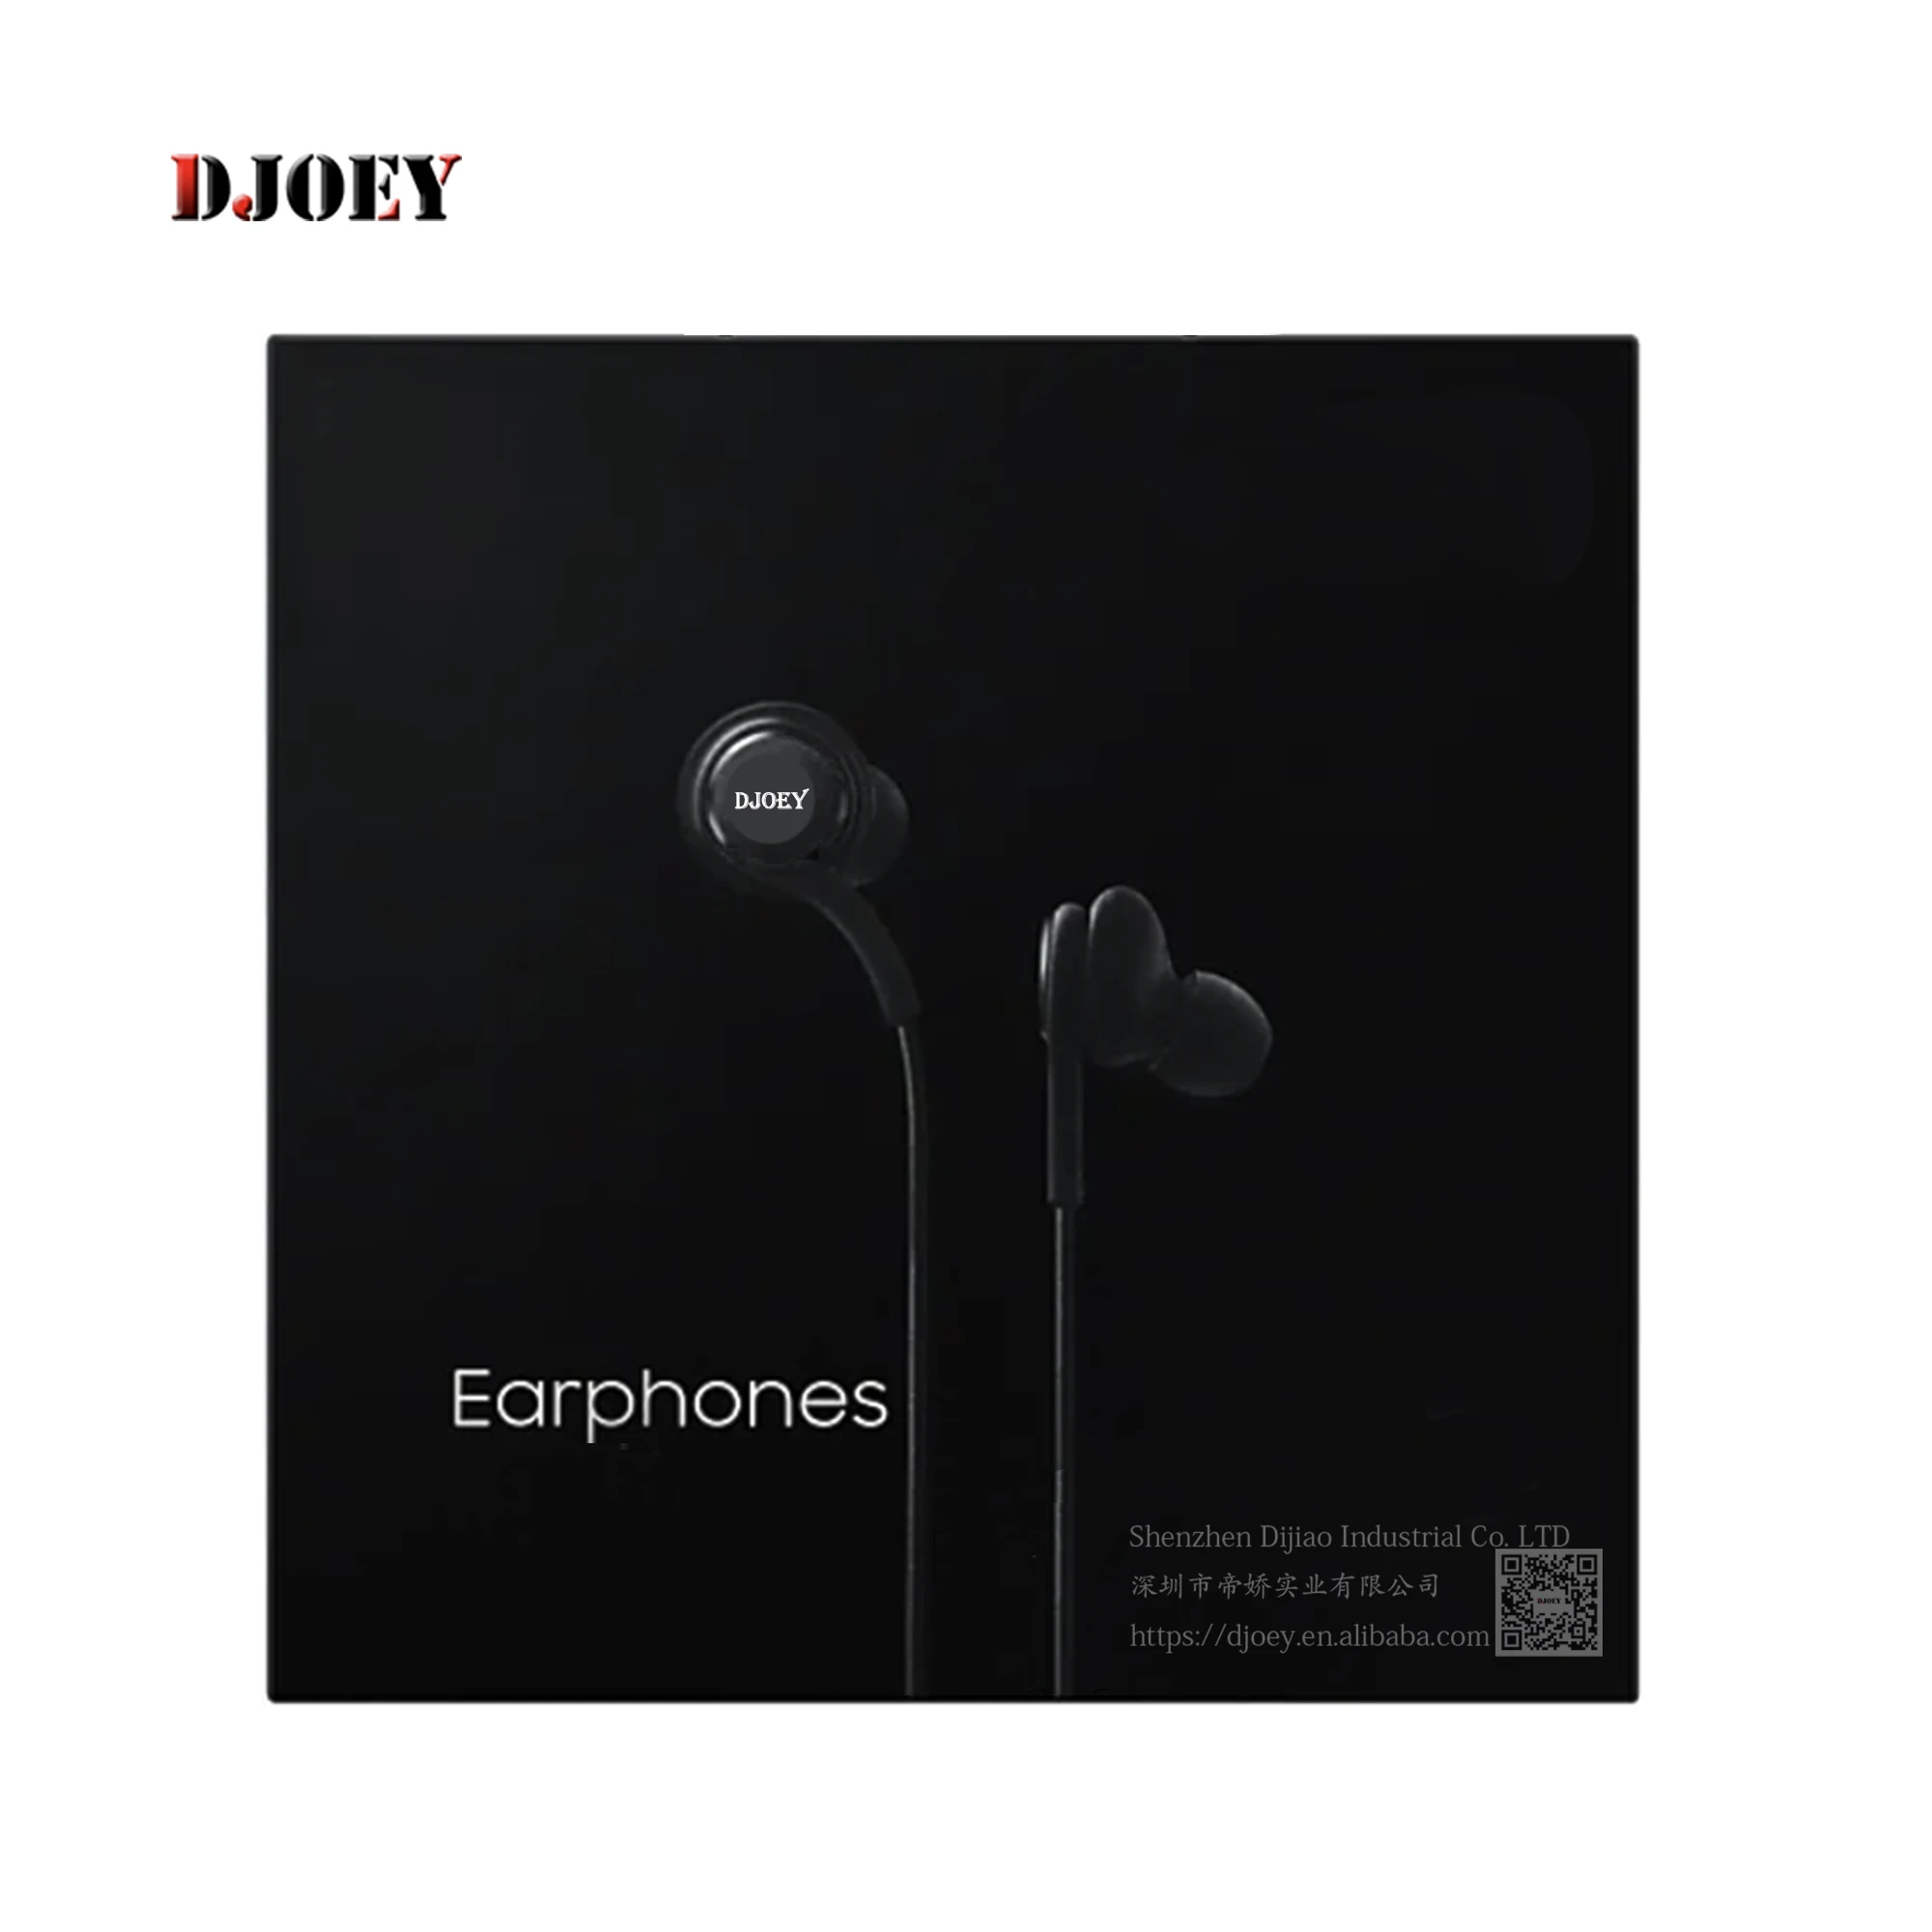 

100% Original EO-IG955 Earbuds In Ear ear buds White Black for Samsung Note 10 Headsets For Akg Type C Headphone